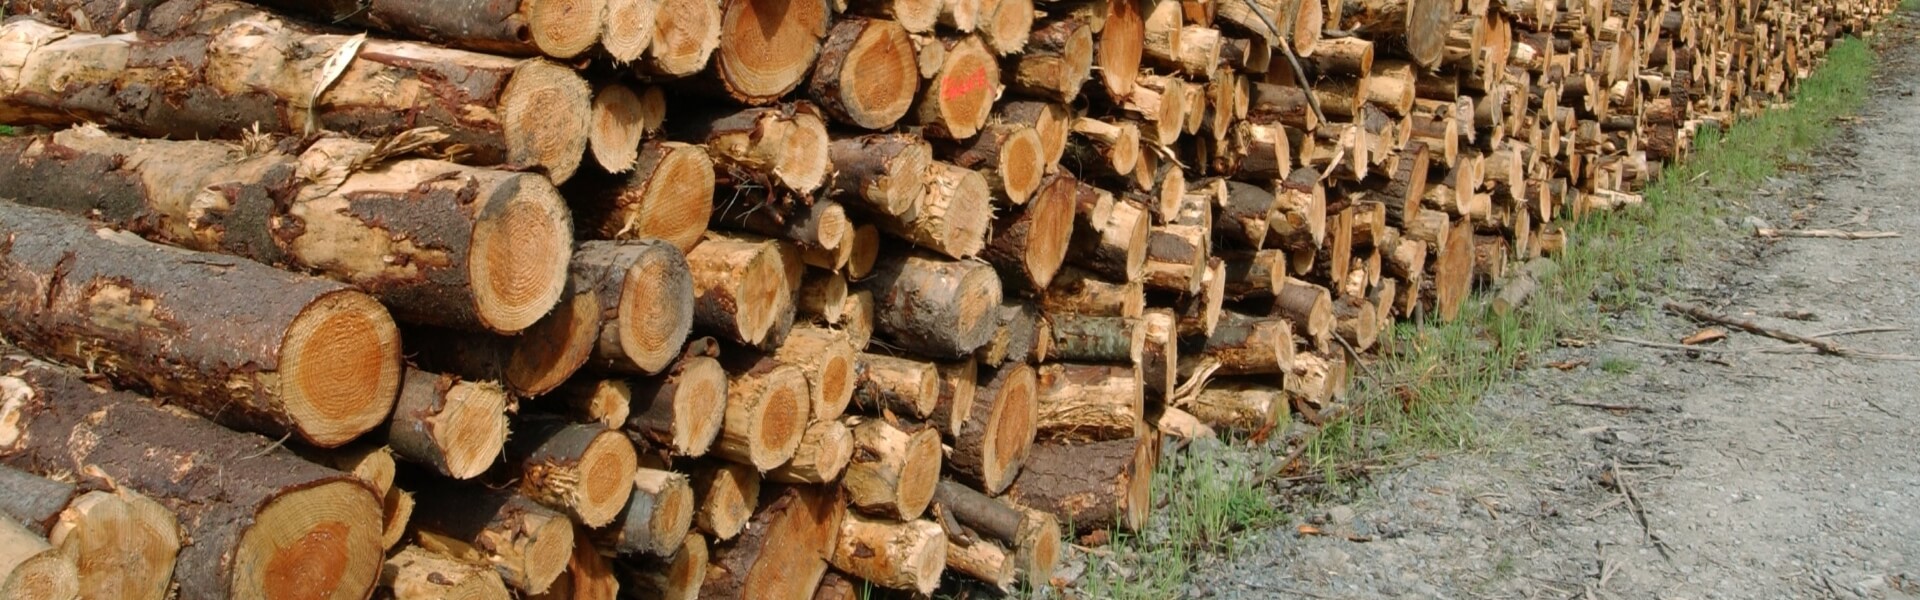 forestry timber price indices